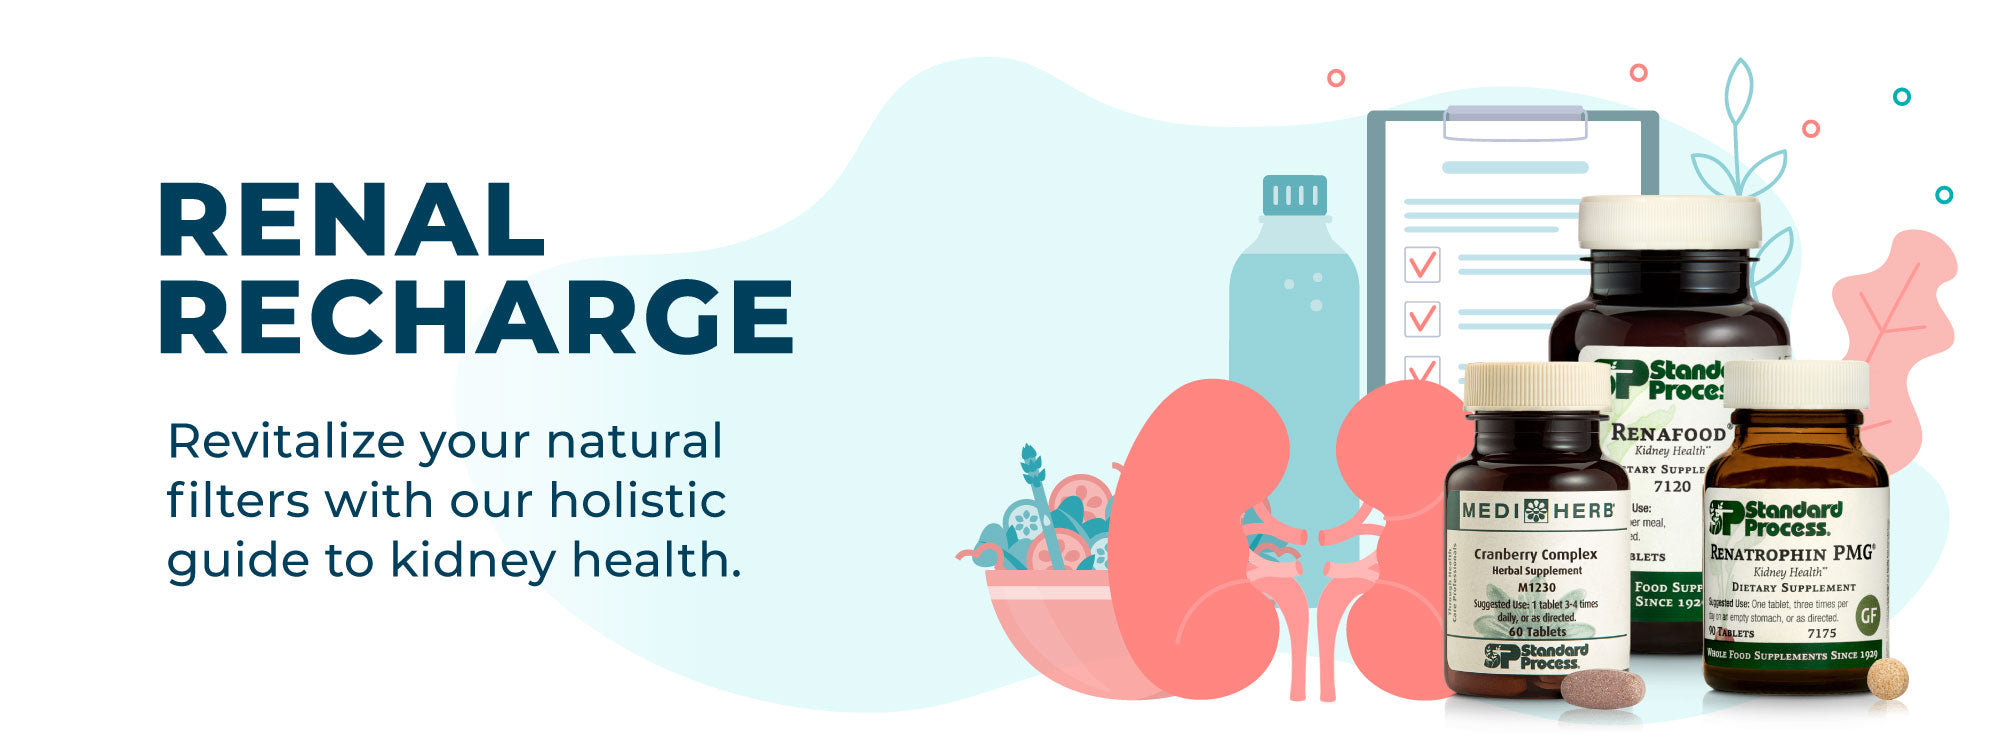 Renal Recharge - Revitalize your natural filters with our holistic kidney health guide